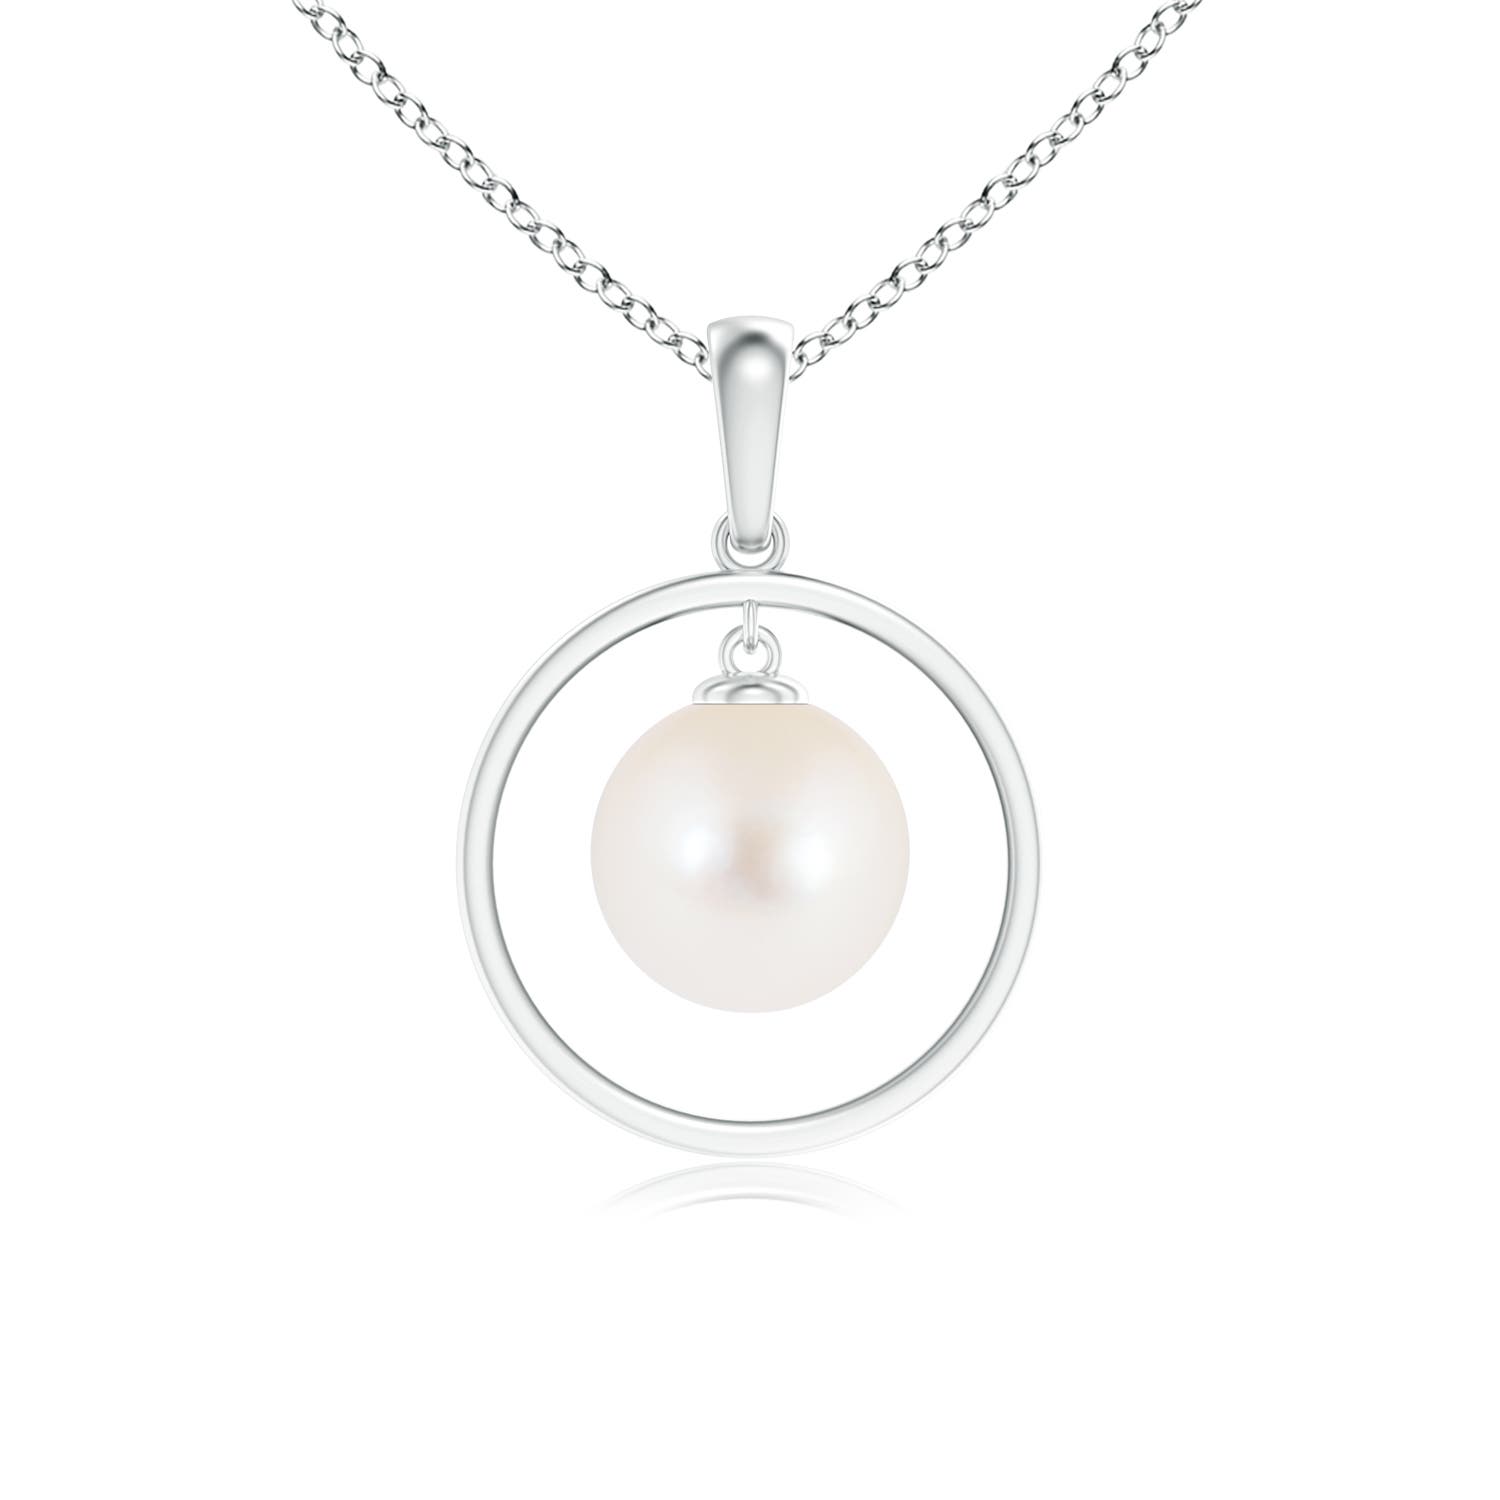 AAA - Freshwater Cultured Pearl / 3.7 CT / 14 KT White Gold